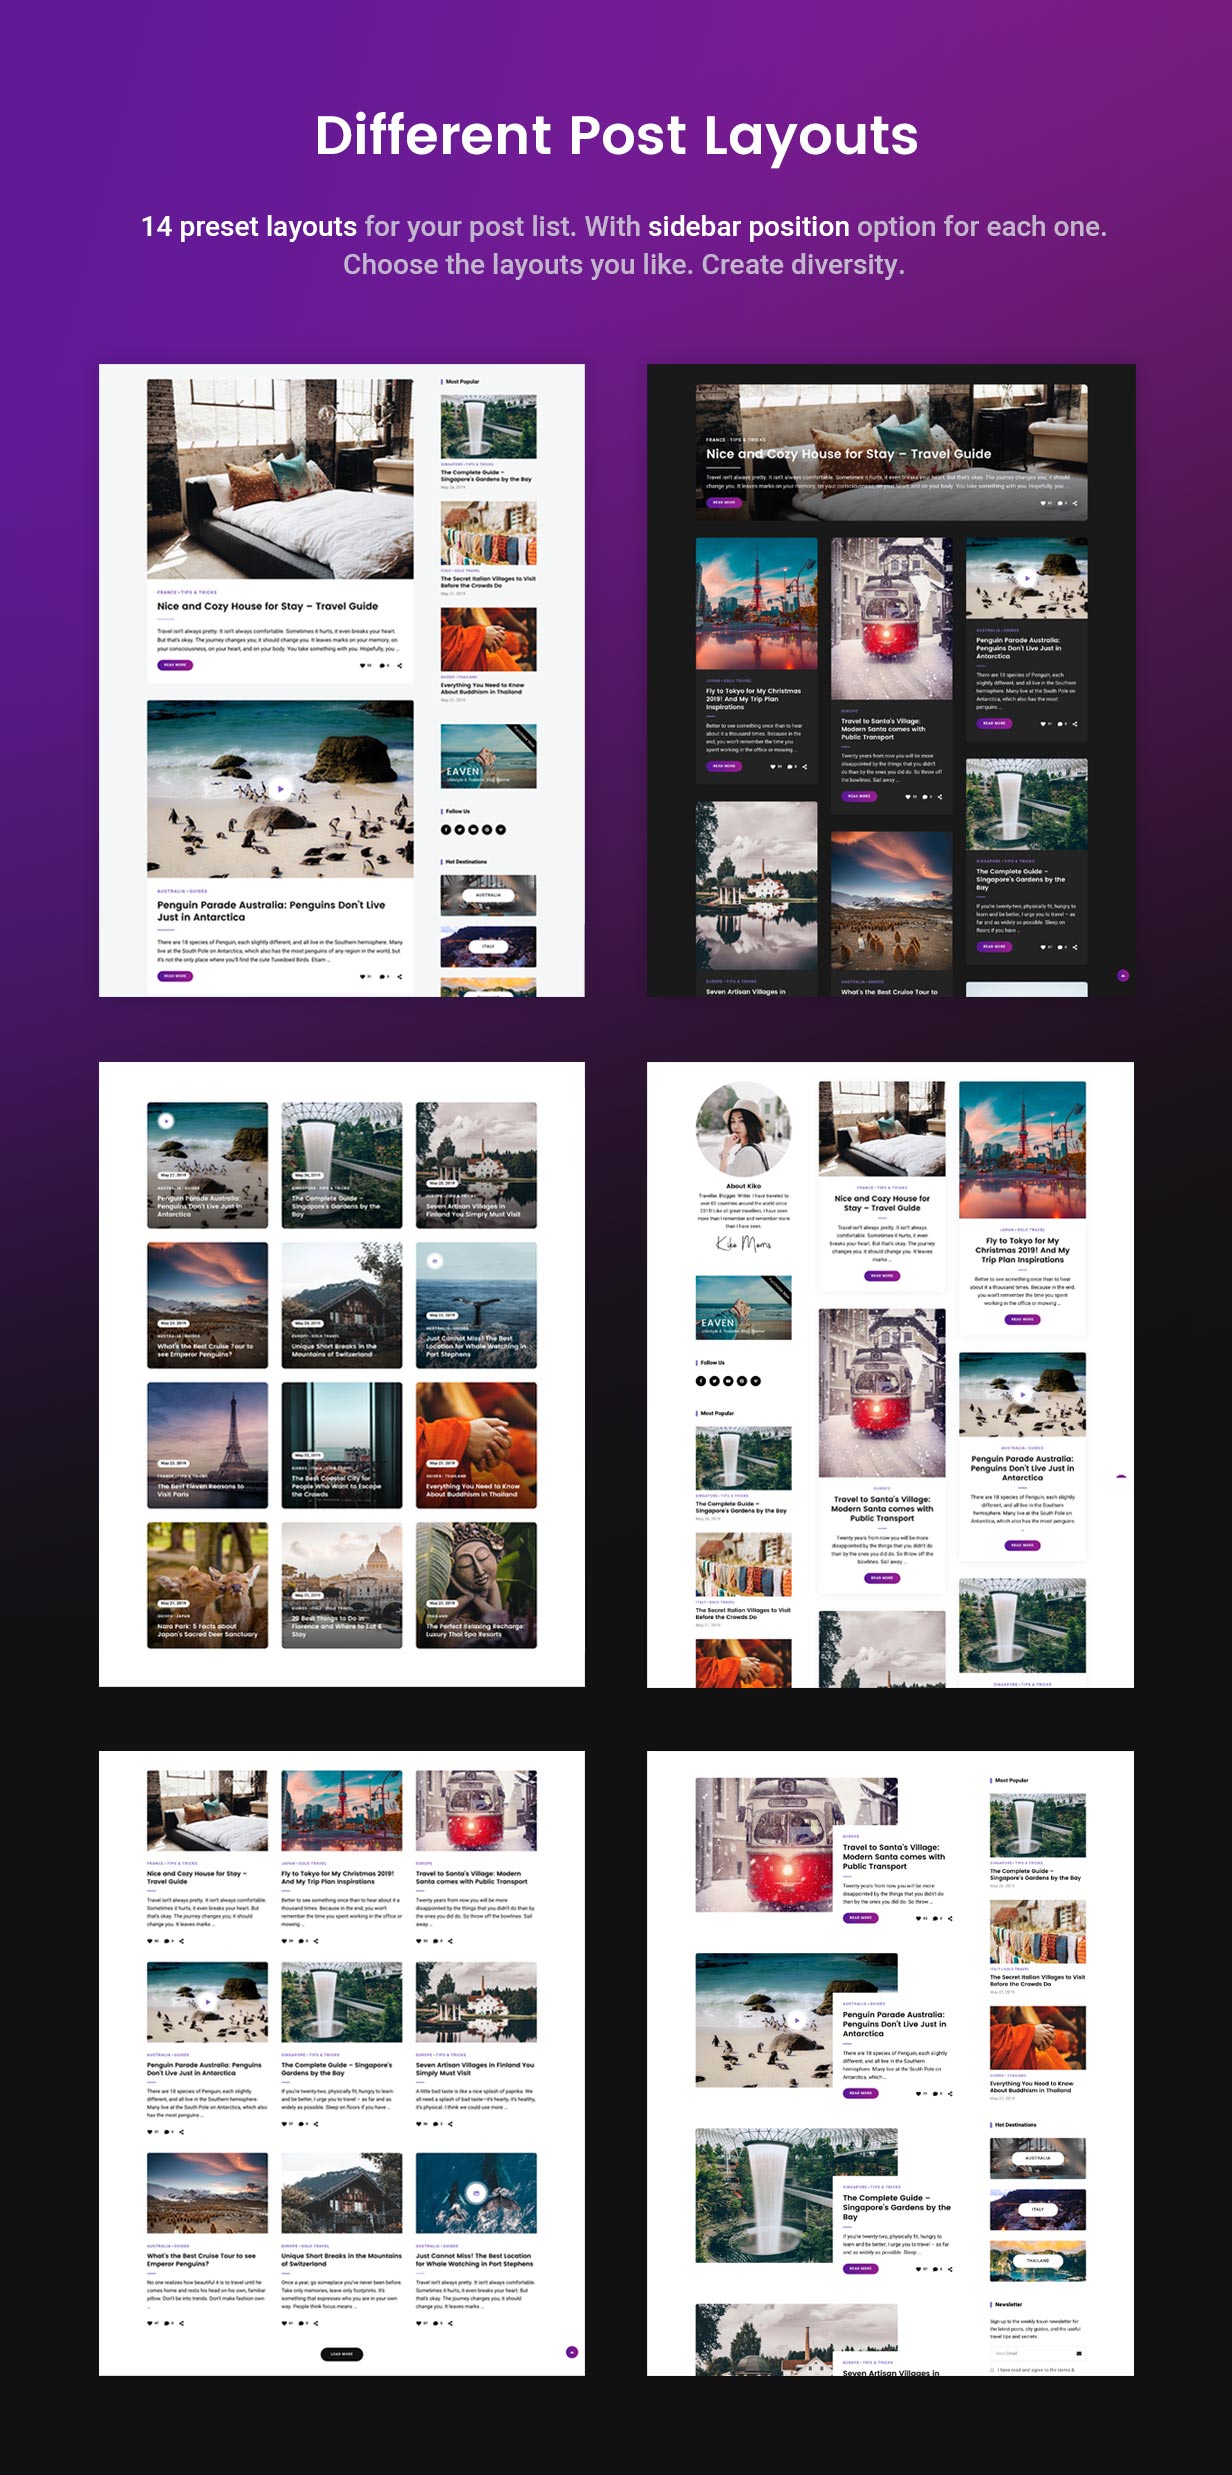 14 Posts Layout Variations